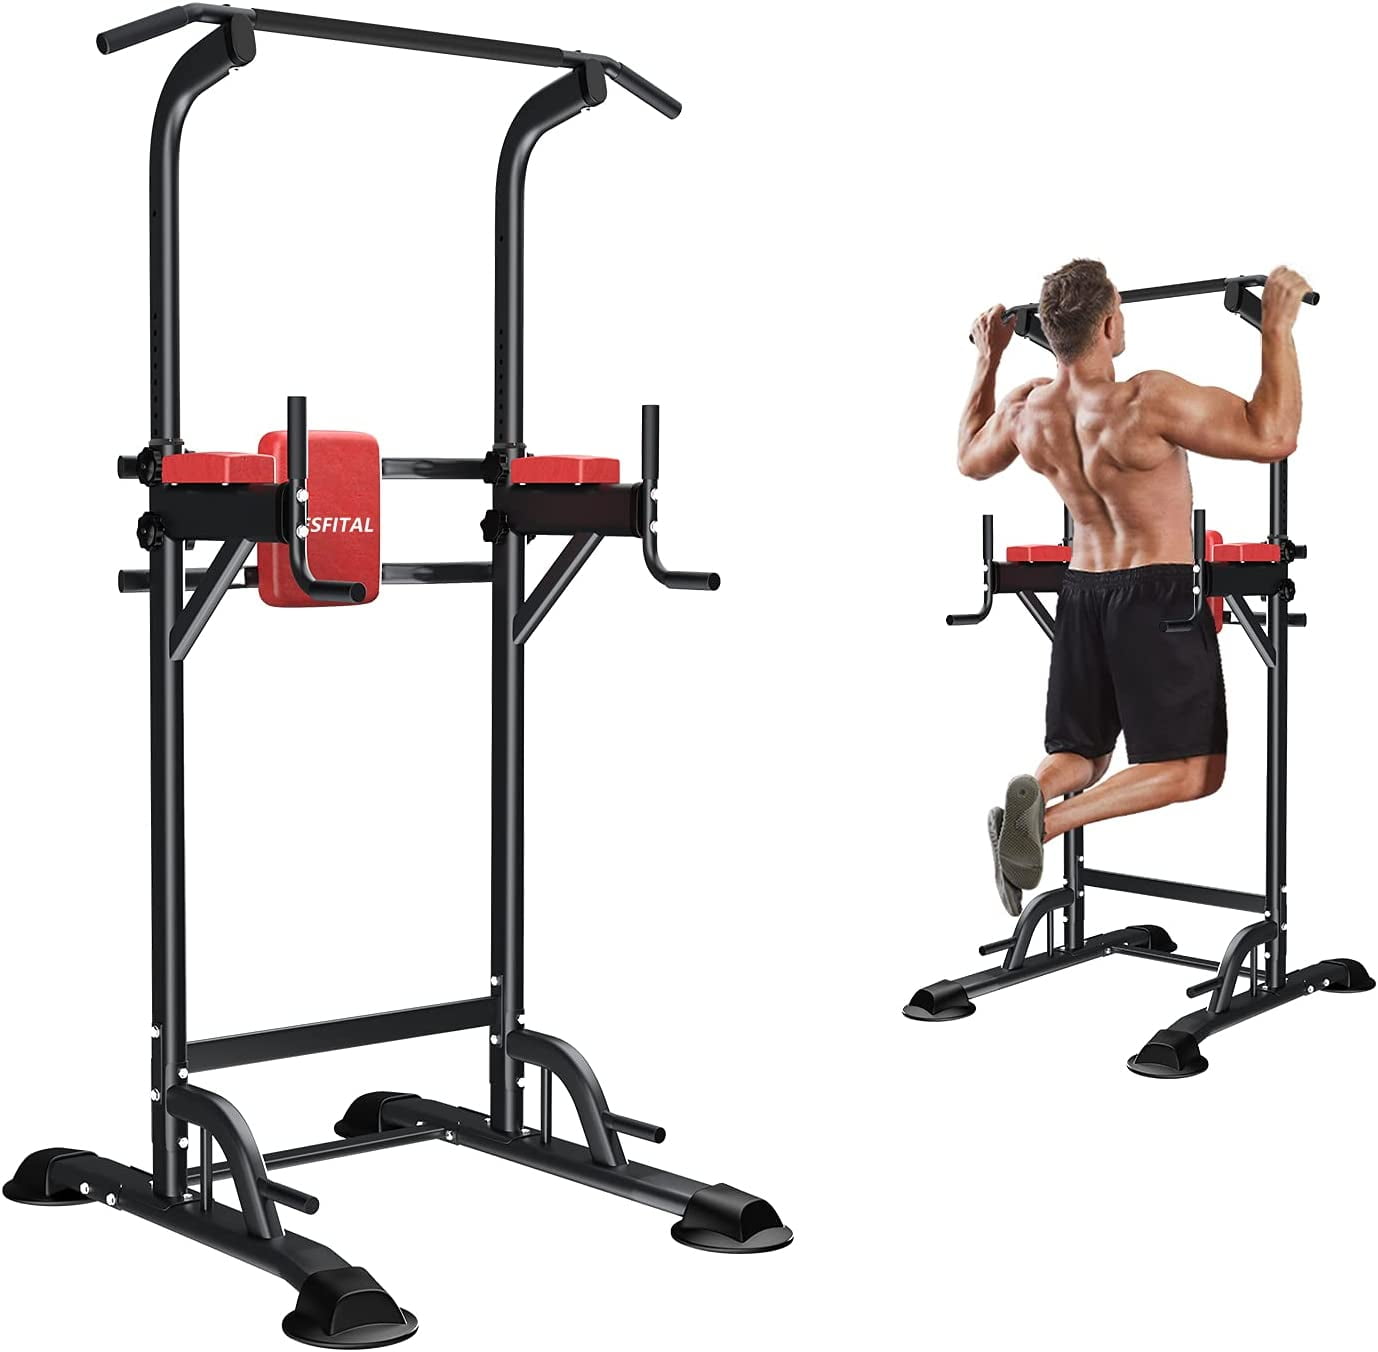 Wesfital Power Tower Dip Station, Pull Up Stand Height Adjustable Strength Training Equipment for Home Workout, Red/Black - Walmart.com